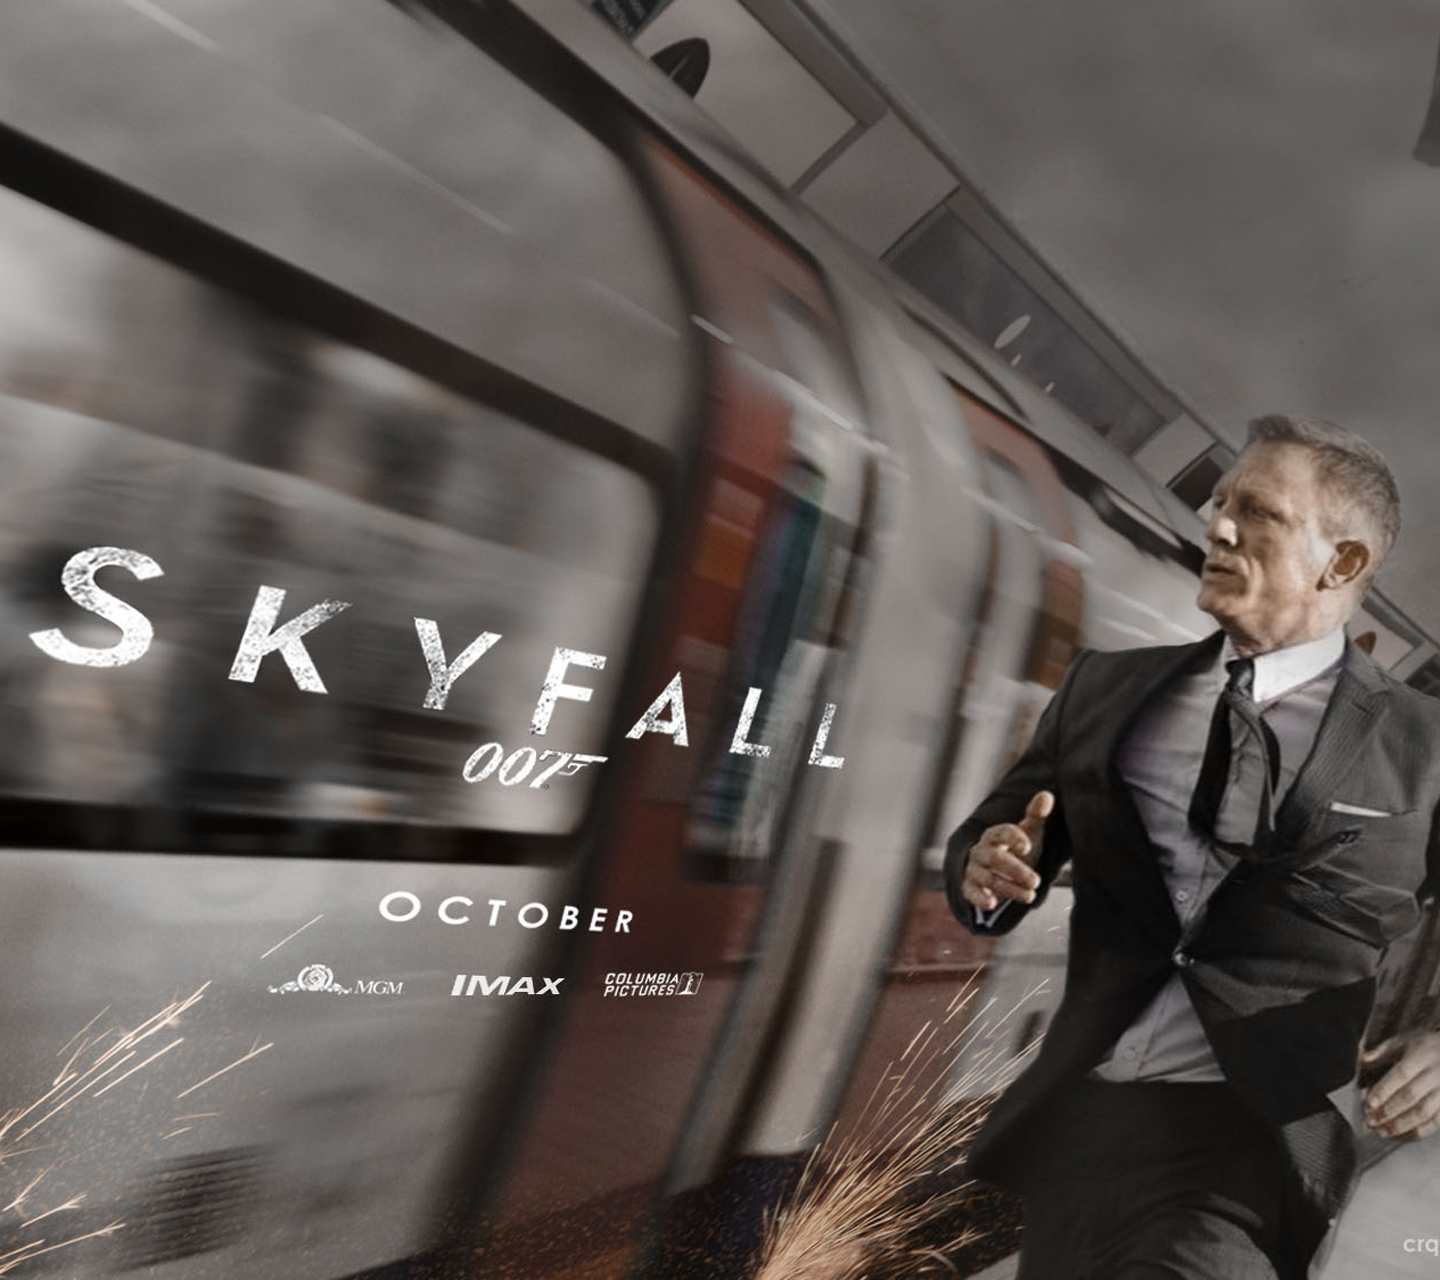 Skyfall download the new version for mac